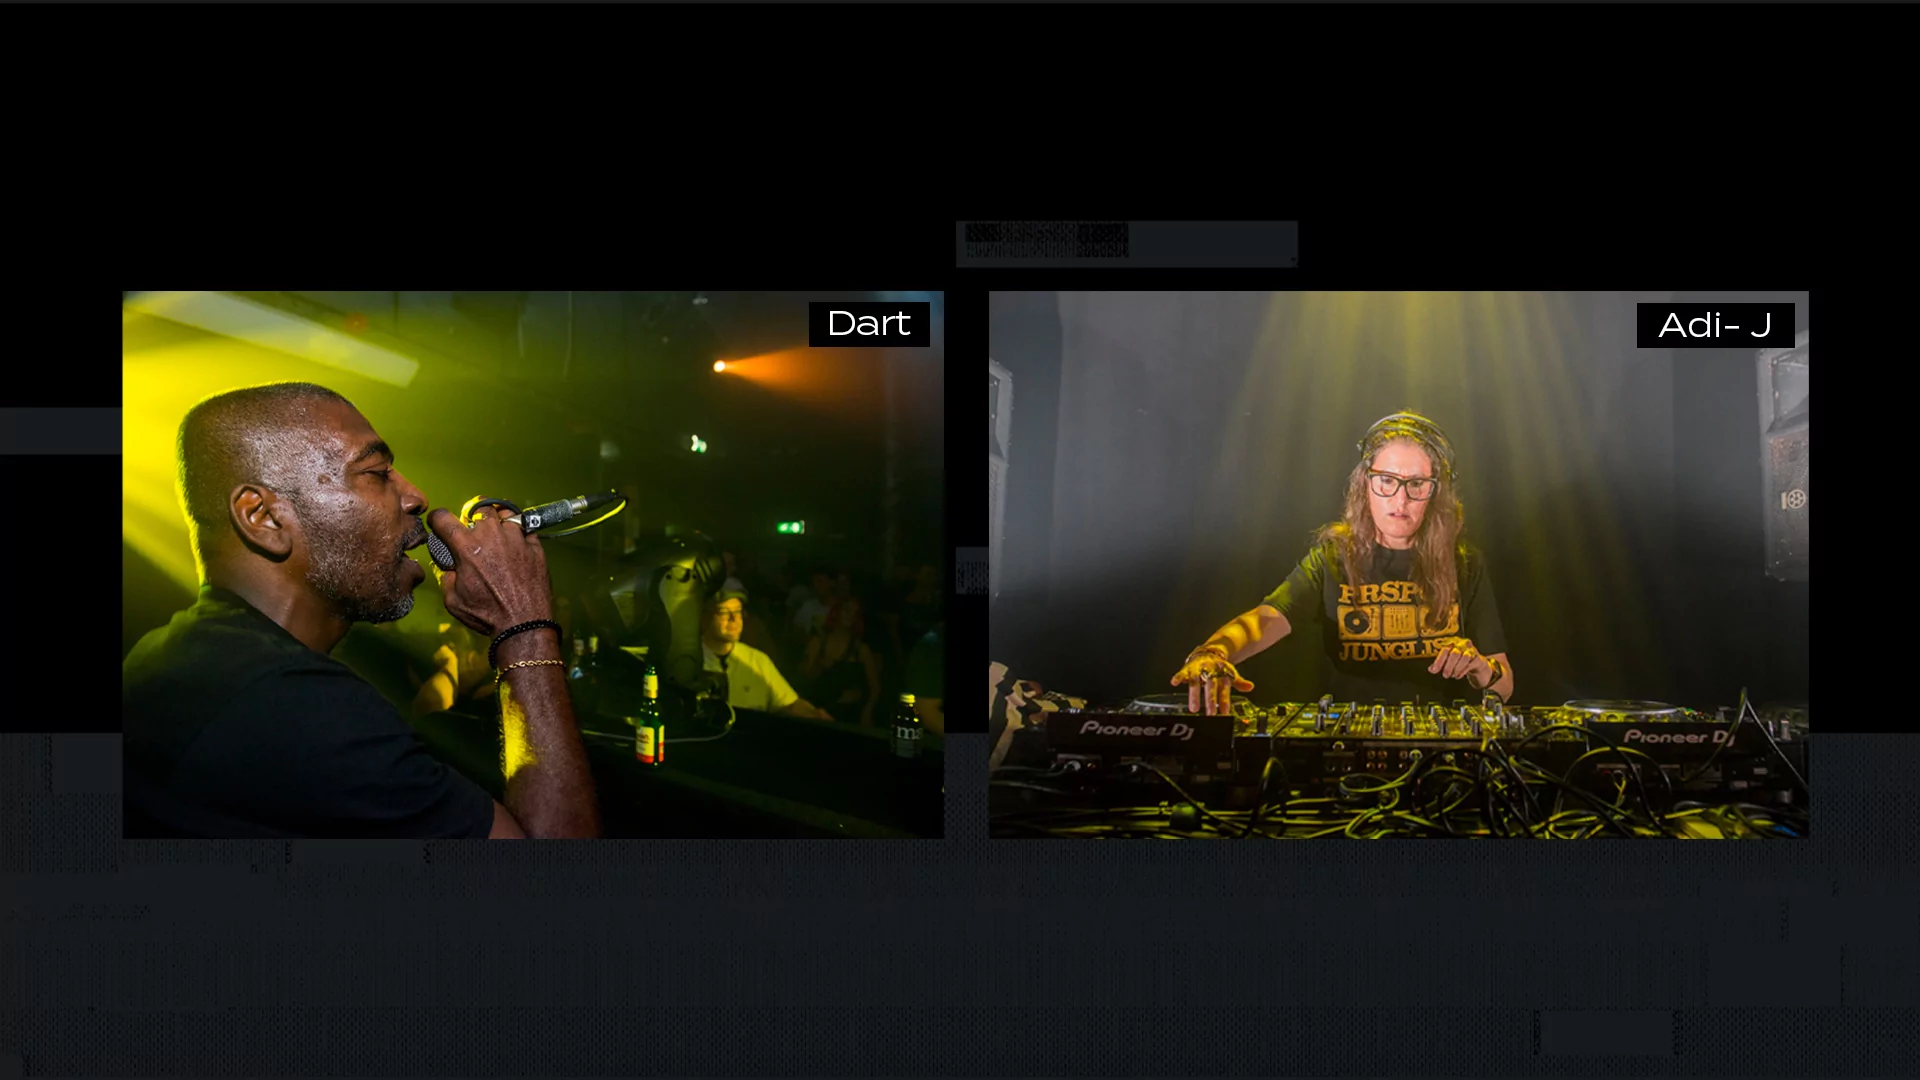 Two photographs on a black background, one of Dart MCing at a PRSPCT party, another of Adi-J DJing